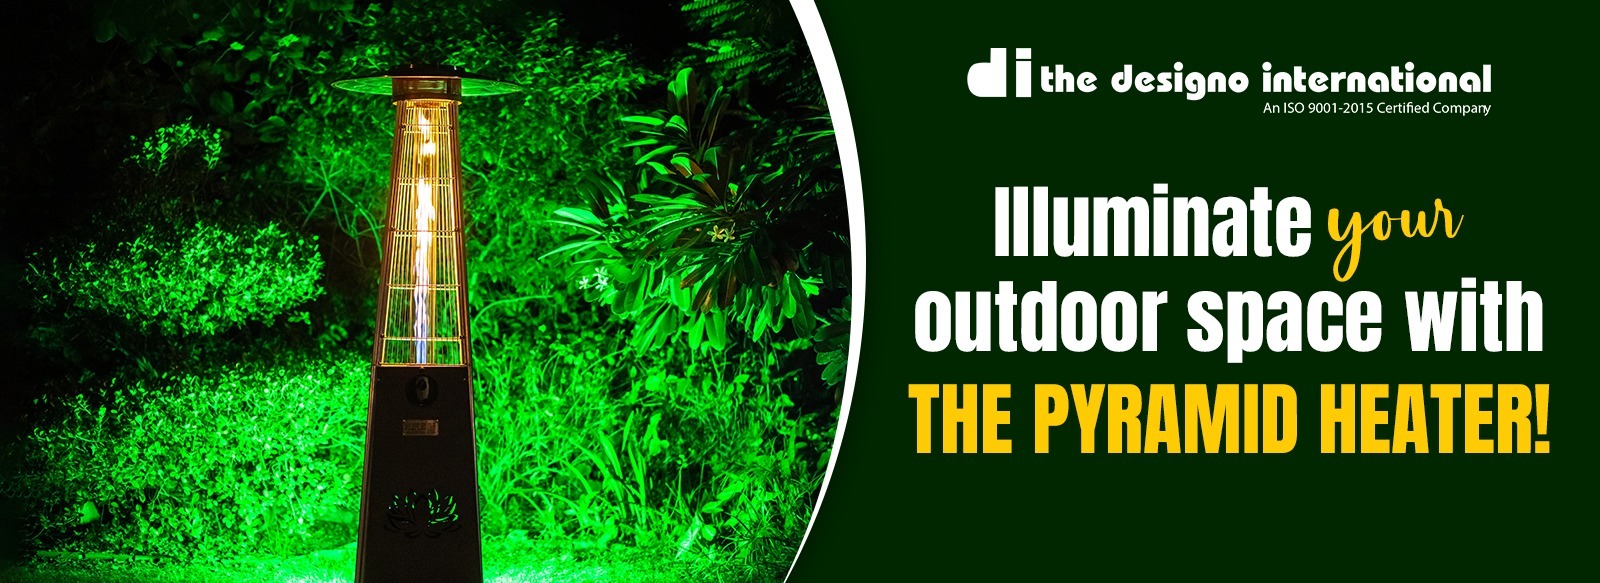 Illuminate your outdoor space with The Pyramid Heater